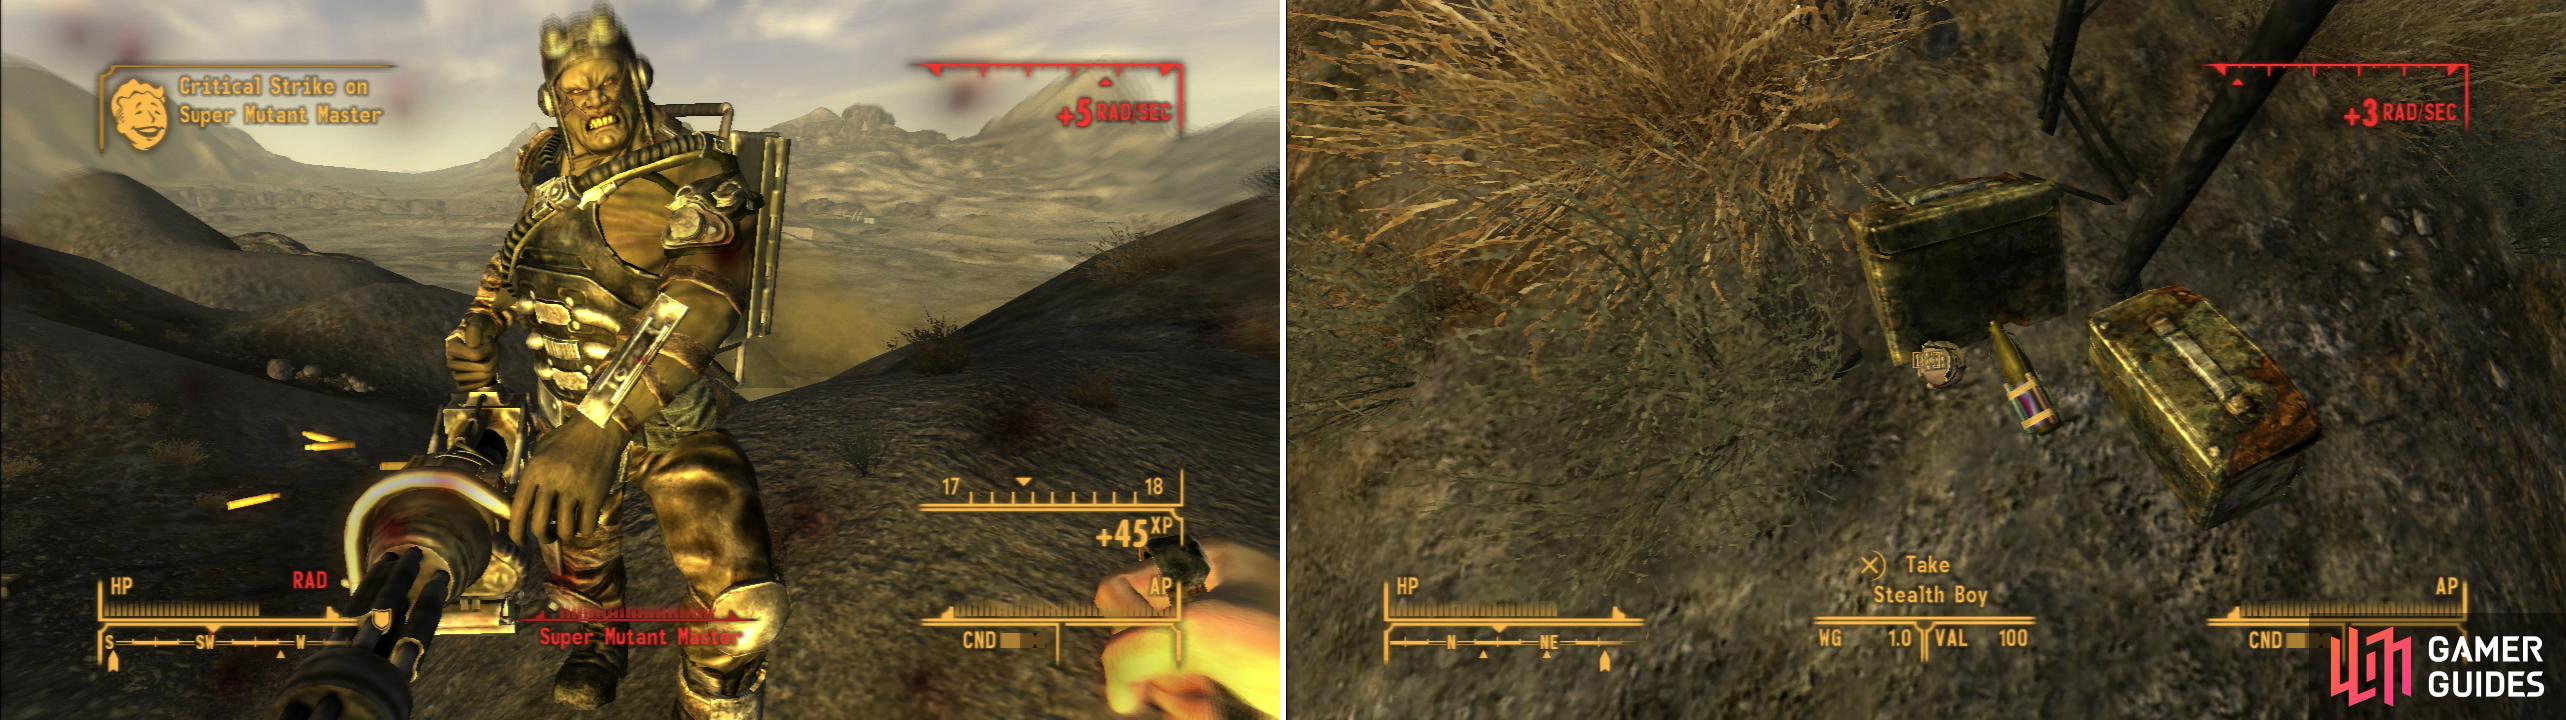 Jack Rabbit Springs is not for the faint of heart, as it is heavily irradiated and occupied by Centaurs and a well-armed Super Mutant (left). The loot you can find here almost makes it worth the trouble (right).